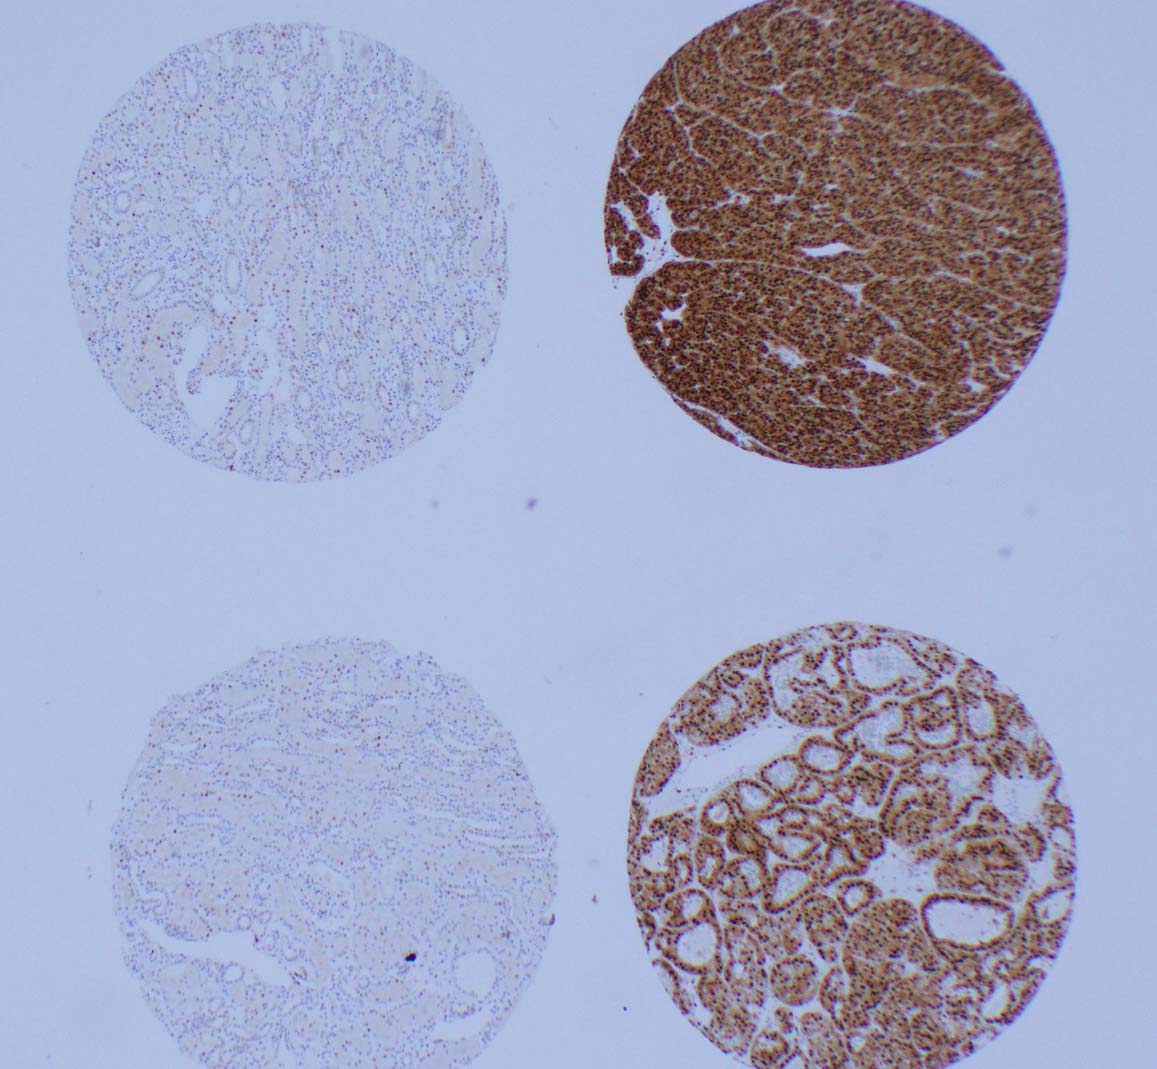 Examples of immunohistochemistry staining of punched tissue specimen with the Cyclin D1 antibody demonstrating (A) normal expression, (B) overexpression, (C) normal expression, and (D) overexpression of Cyclin D1.